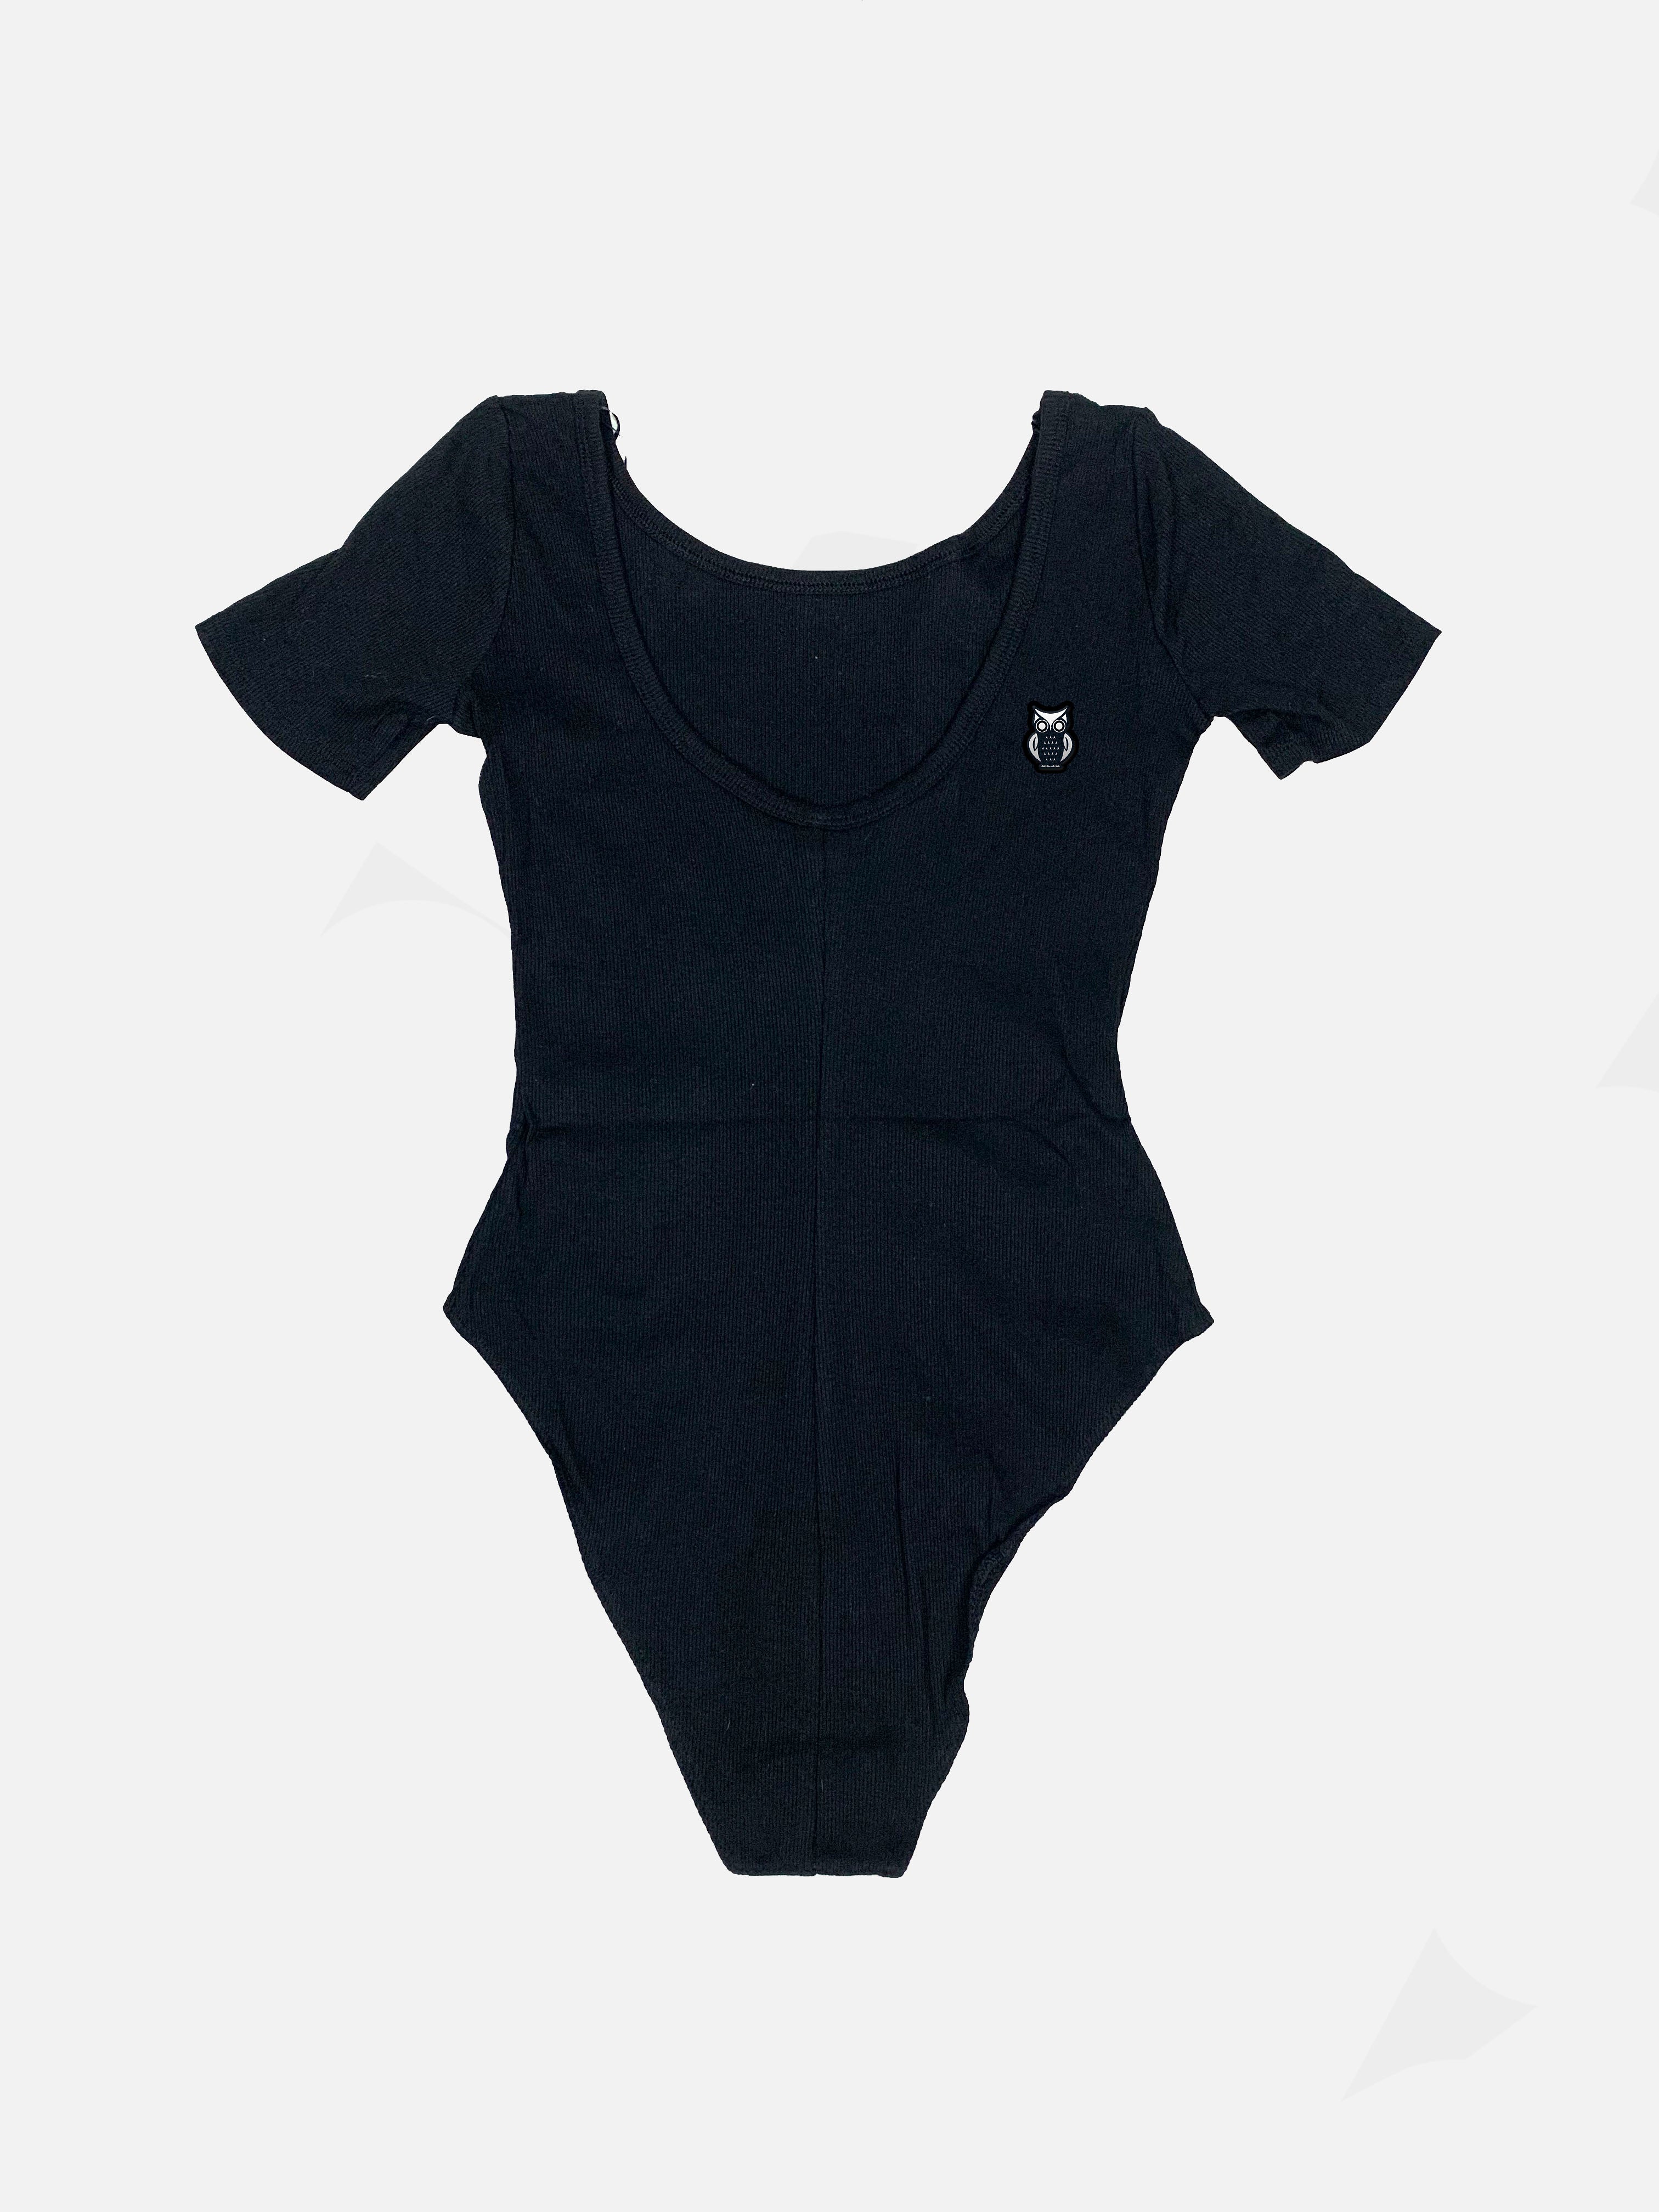 Carina x Hipster Fitted Bodysuit